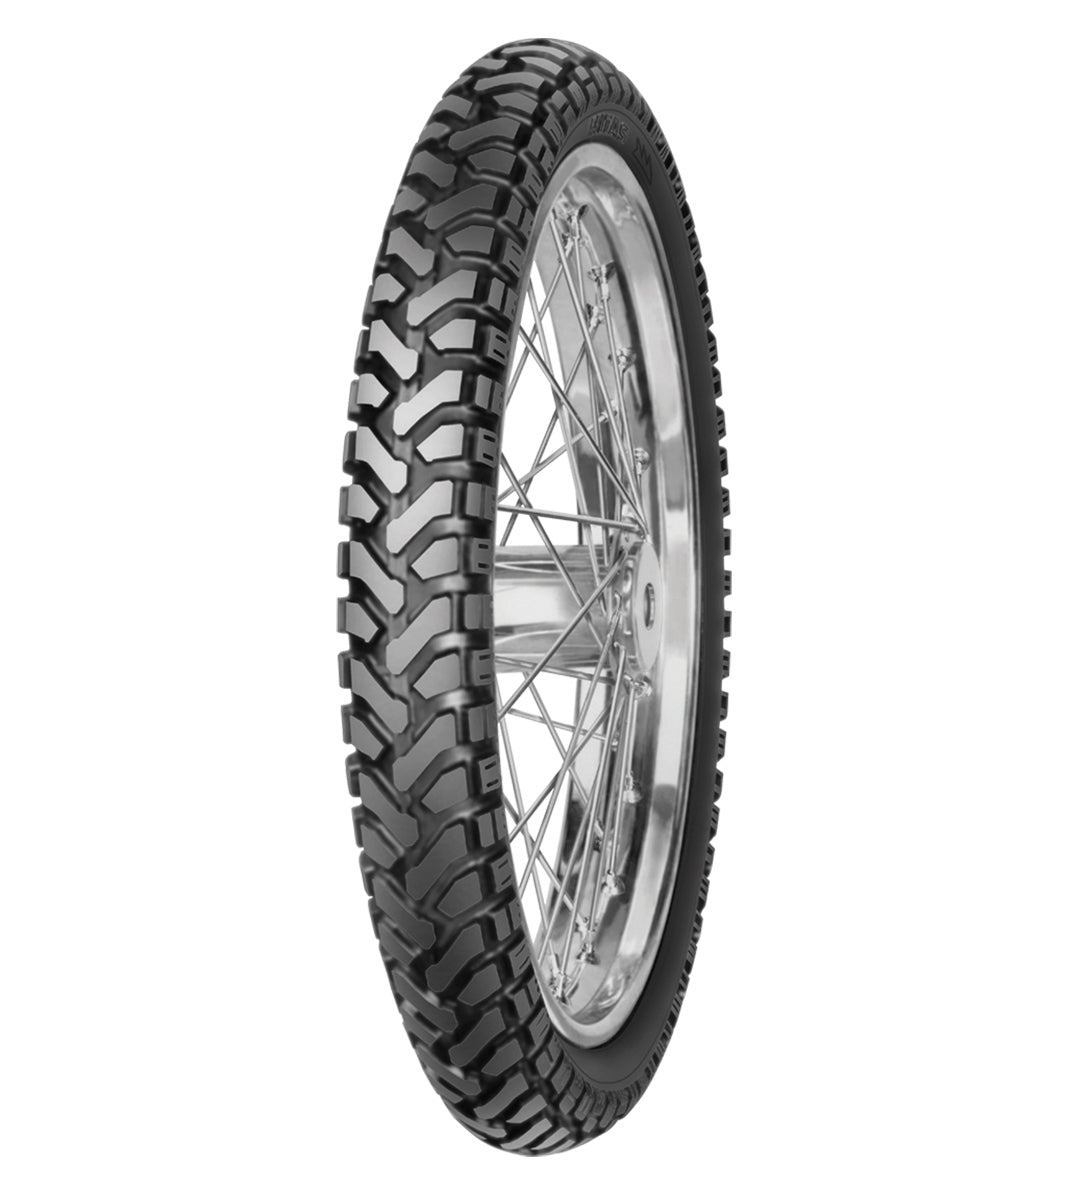 Mitas E-07 ENDURO 110/80-19 Trail OFF Trail 59T No Stripe Tubeless Front Tire, 224439, 110/80-19, Adventure Touring, E Series, E-07 Enduro, Front, Trail, Trail OFF, Tires - Imported and distributed in North & South America by Lindeco Genuine Powersports - Premier Powersports Equipment and Accessories for Motorcycle Enthusiasts, Professional Riders and Dealers.